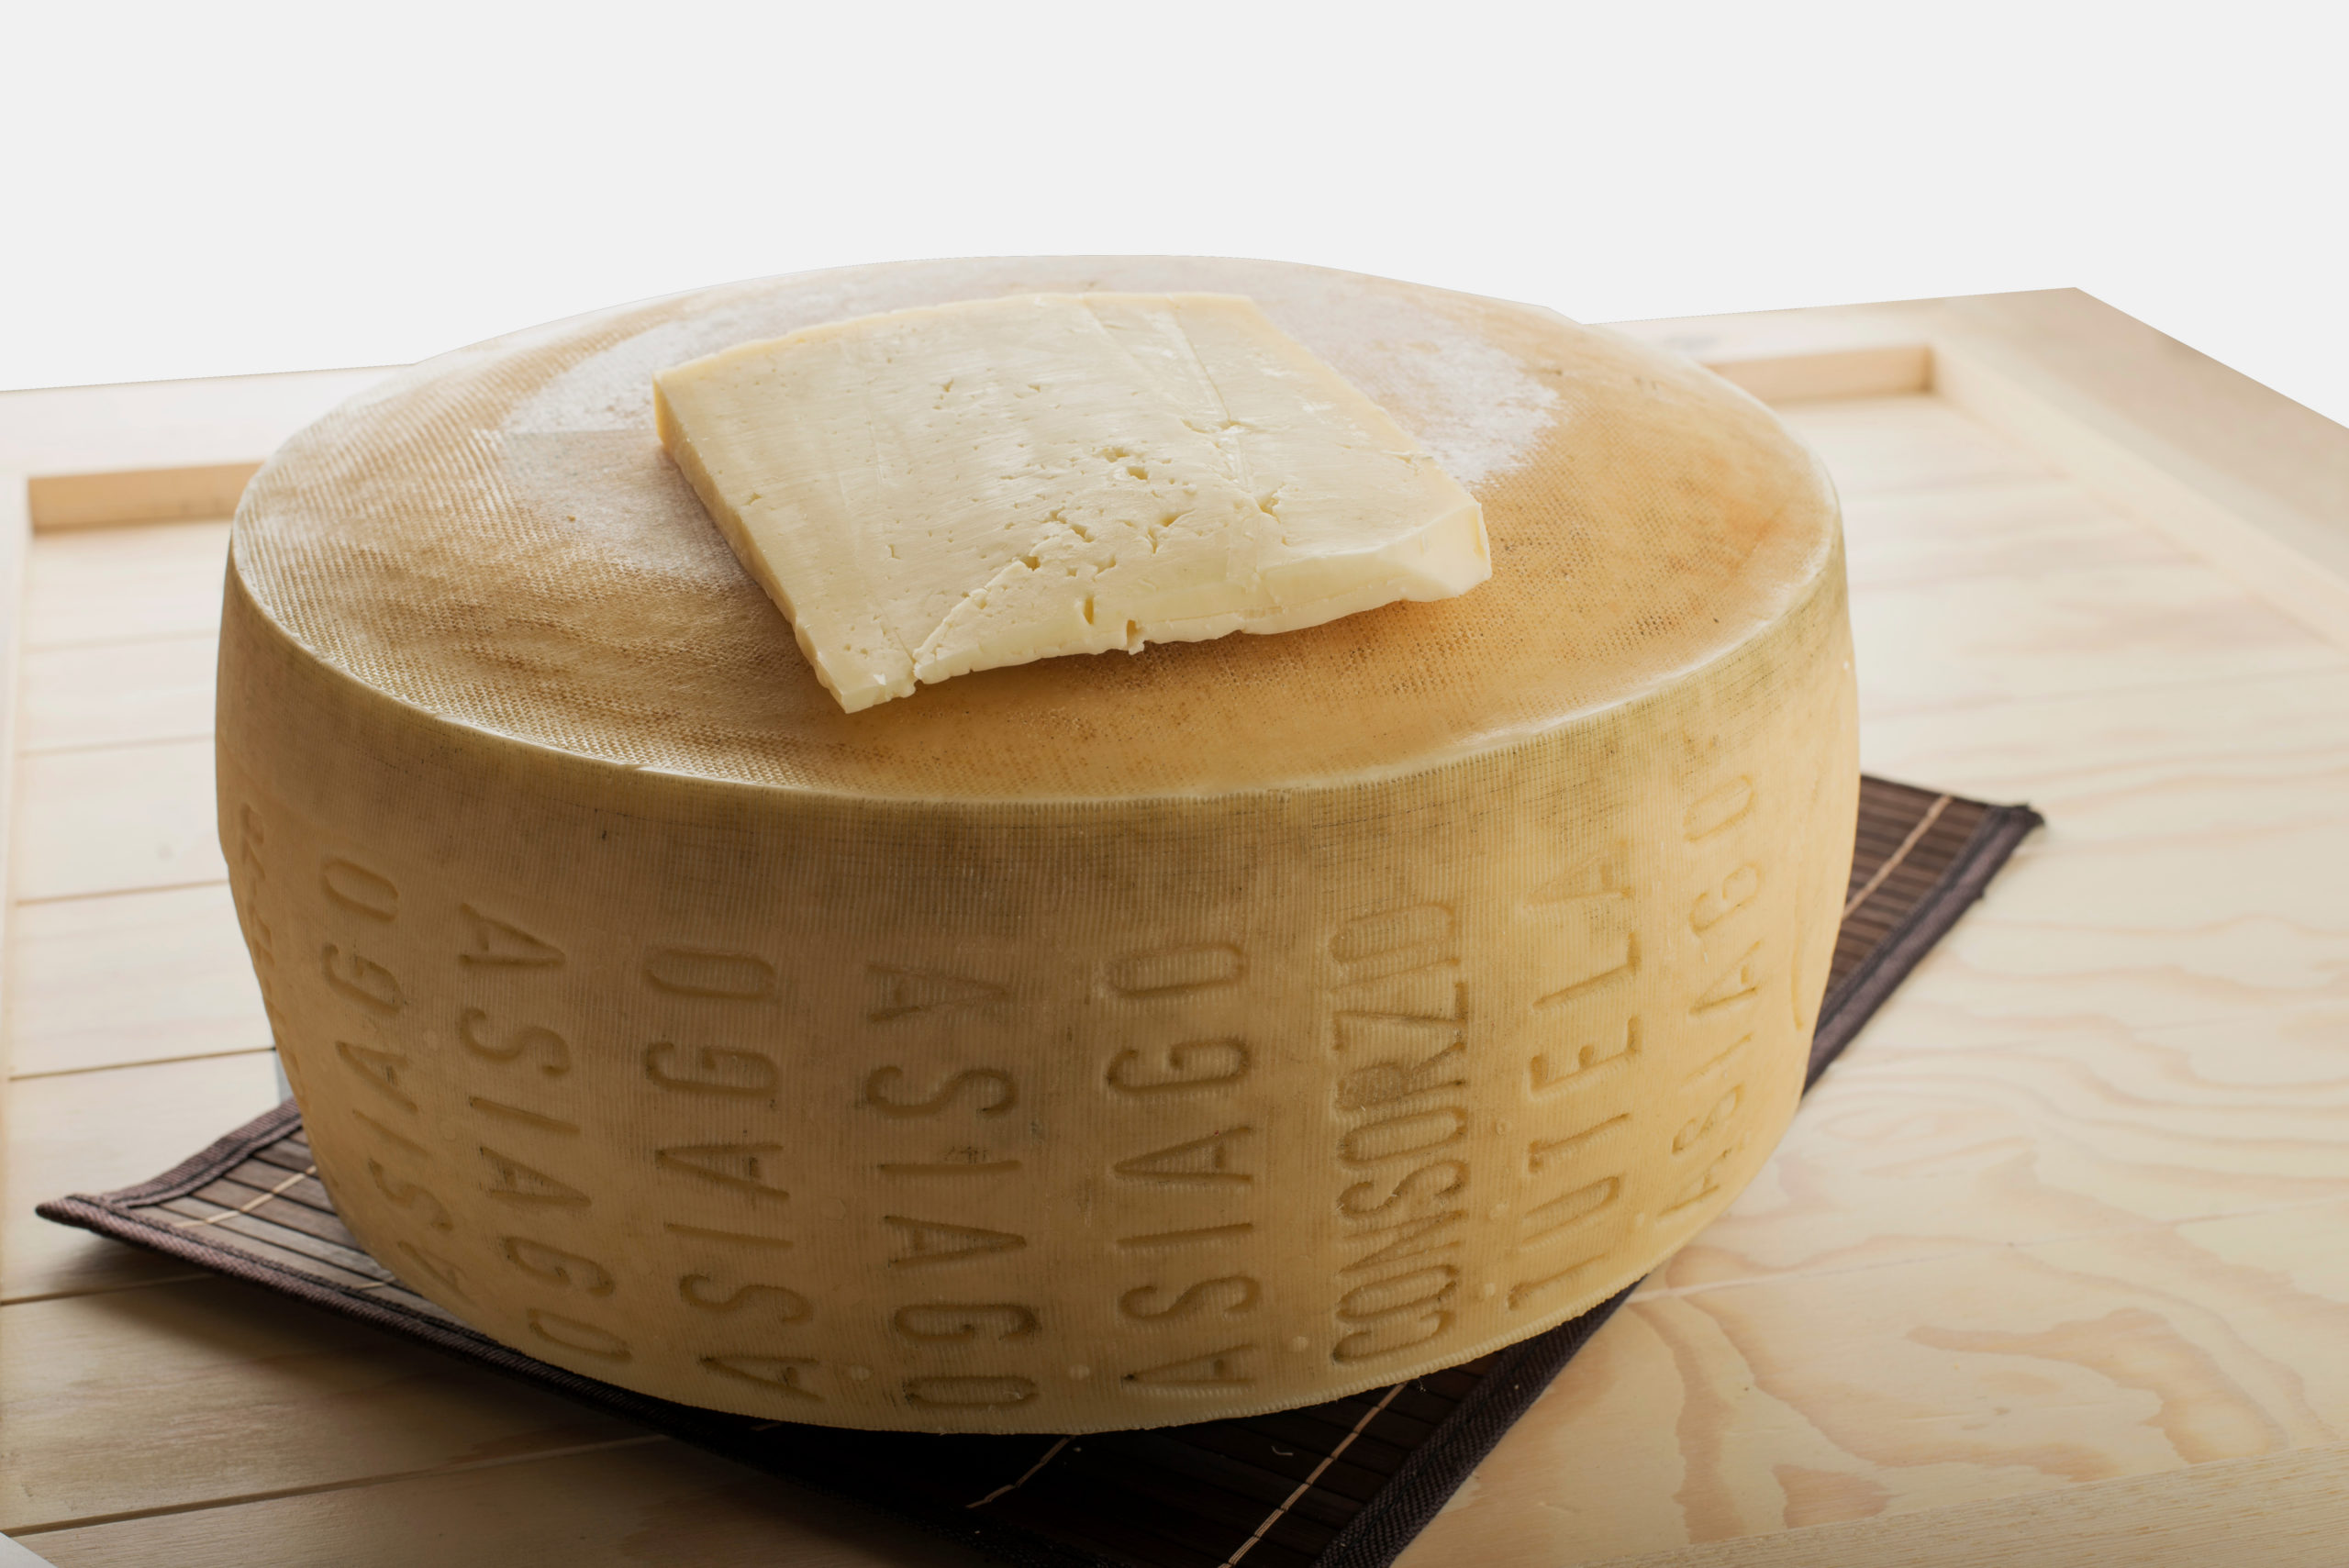 How Rigoni di Asiago is winning over consumers worldwide